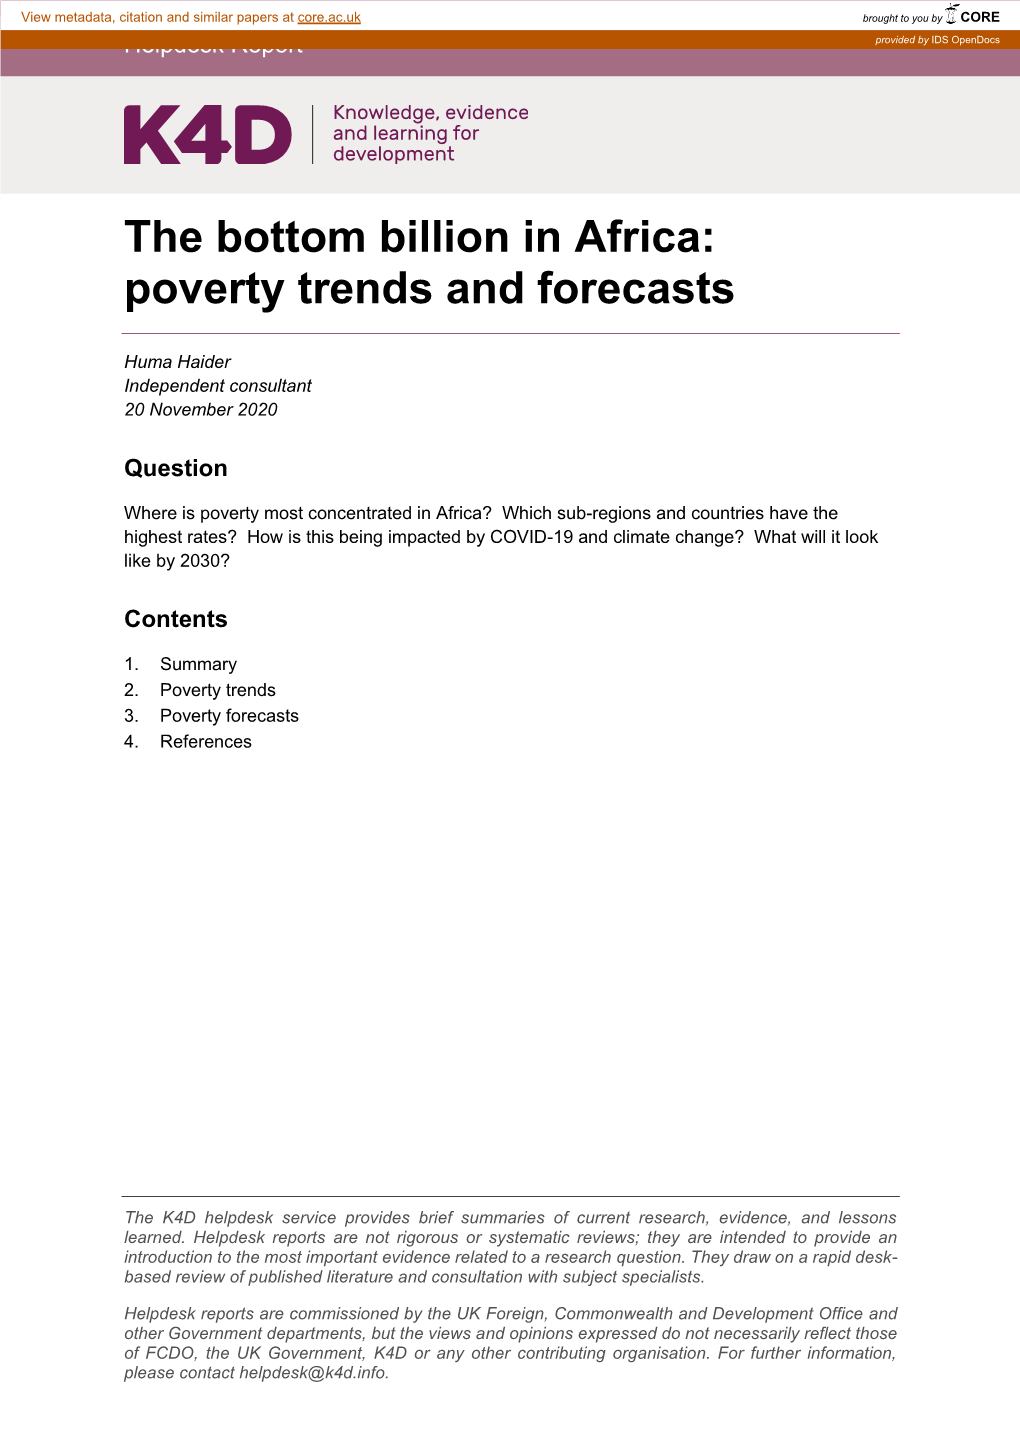 The Bottom Billion in Africa: Poverty Trends and Forecasts